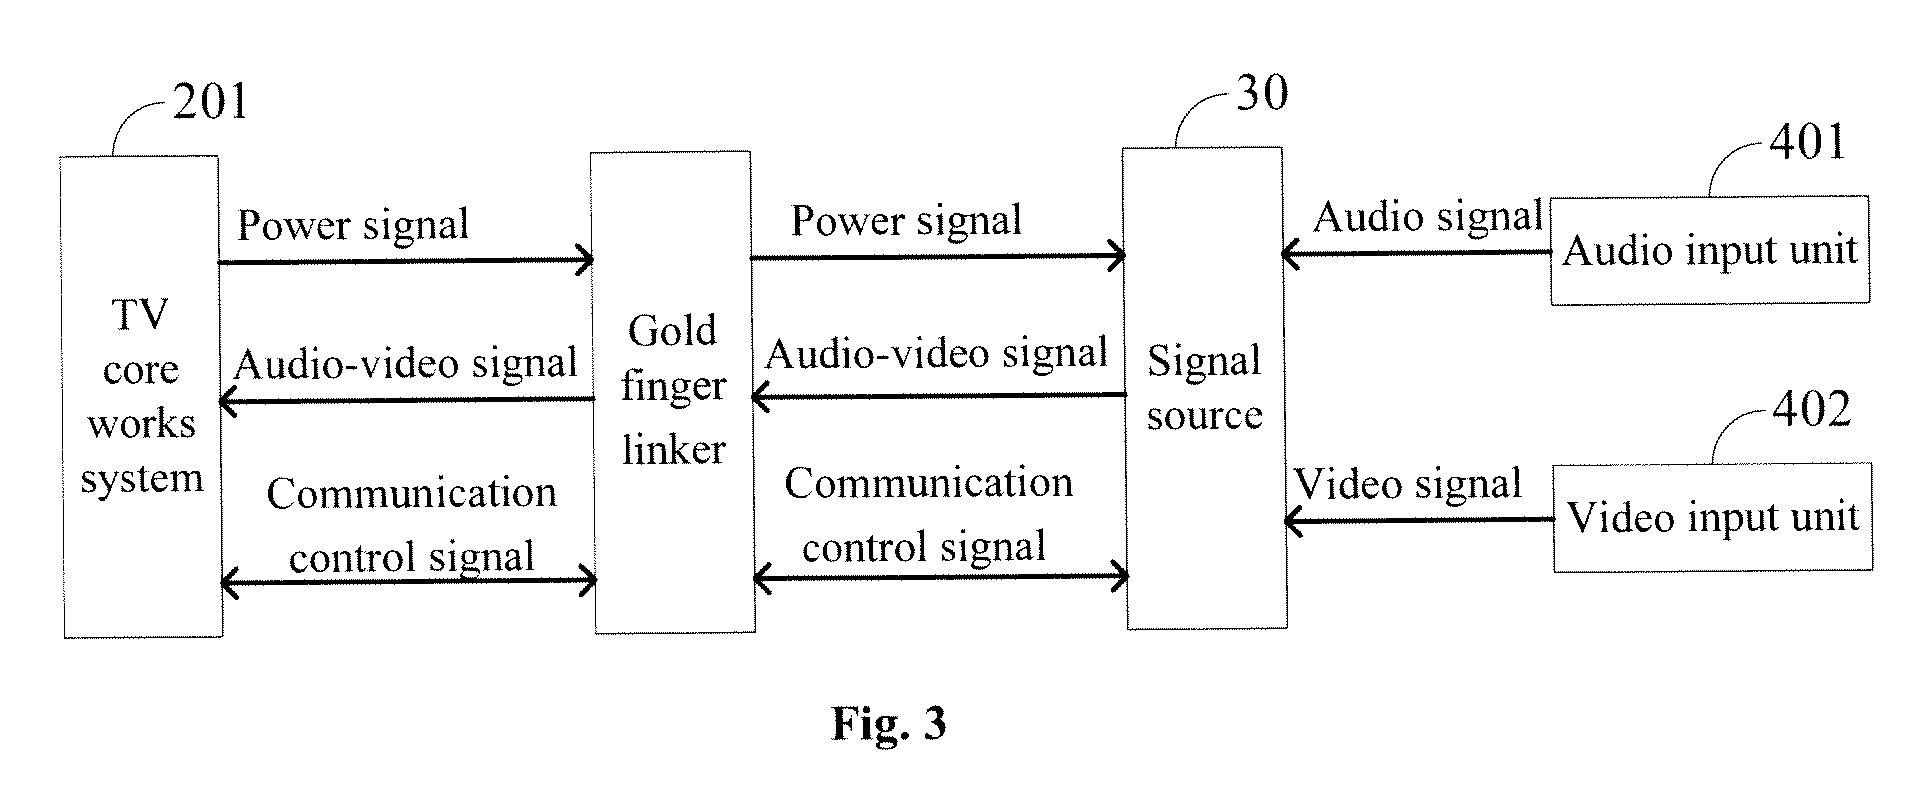 Signal source and TV with the signal source